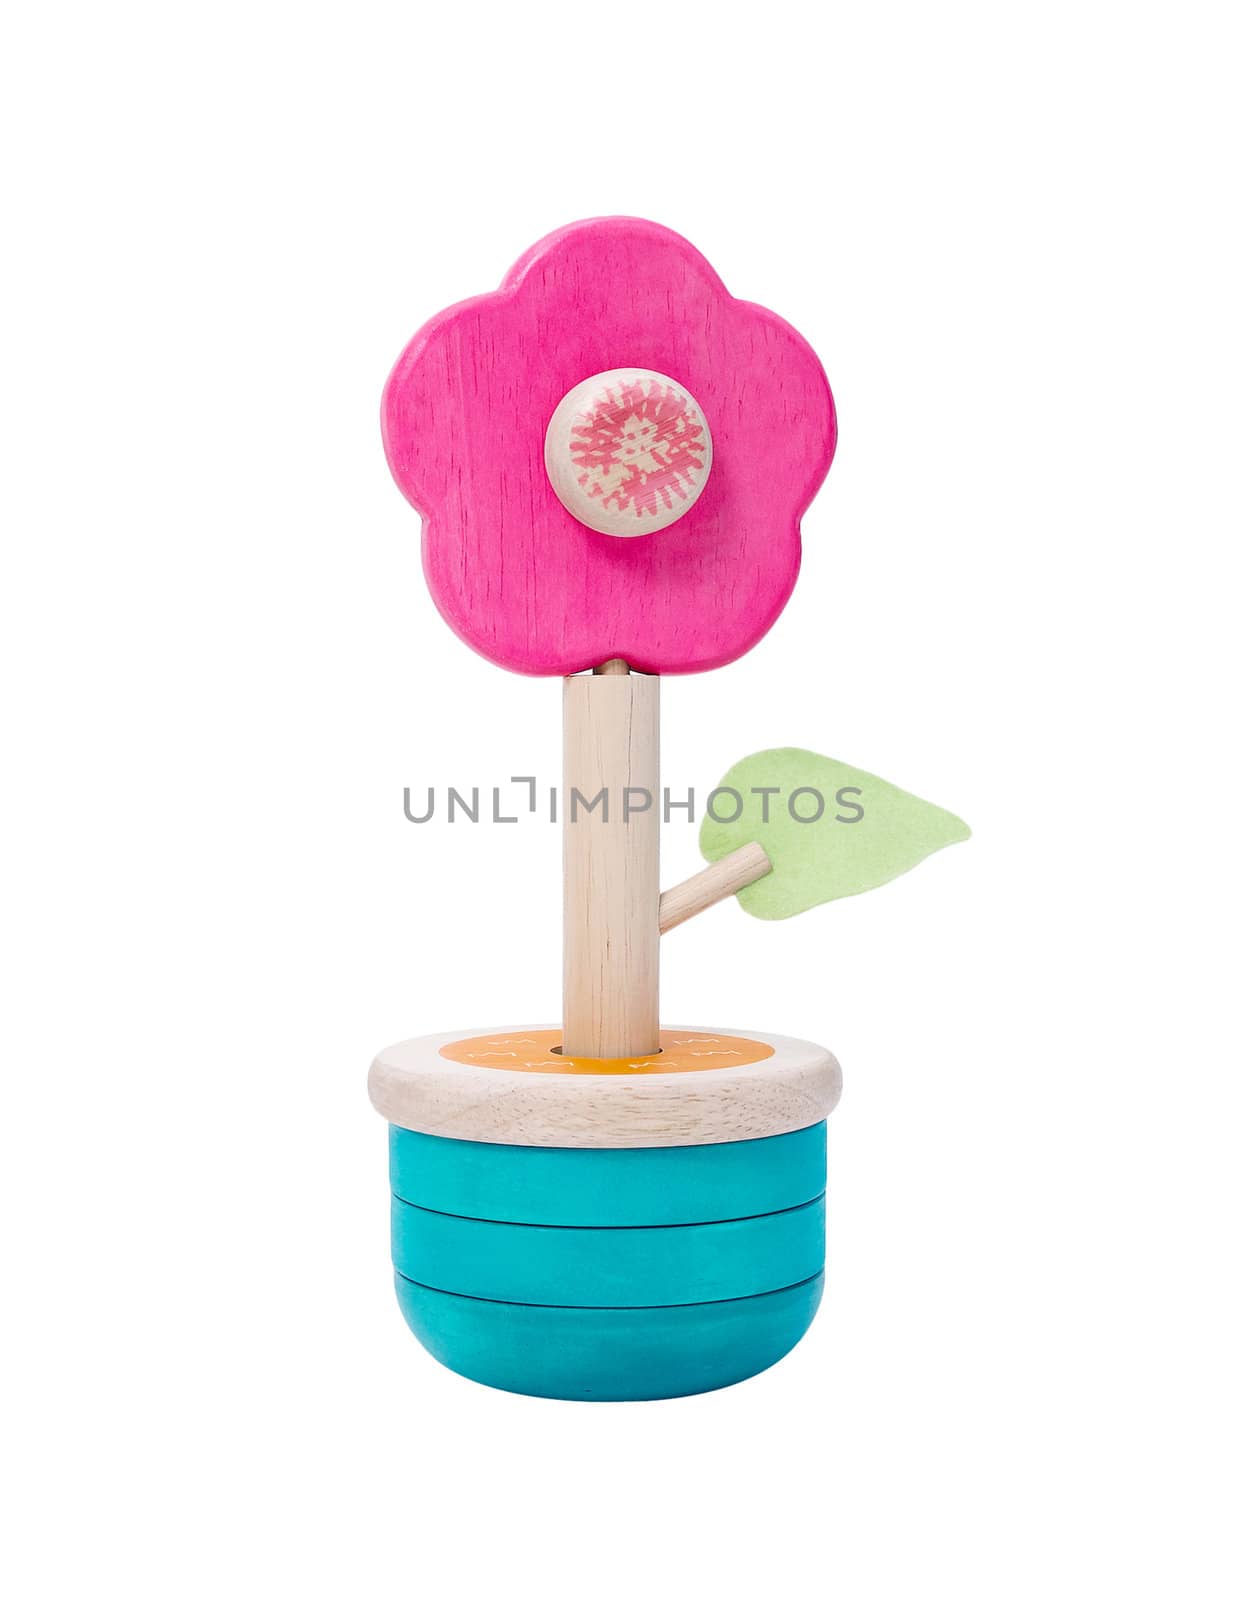 Colorful wooden flower toy vase isolates